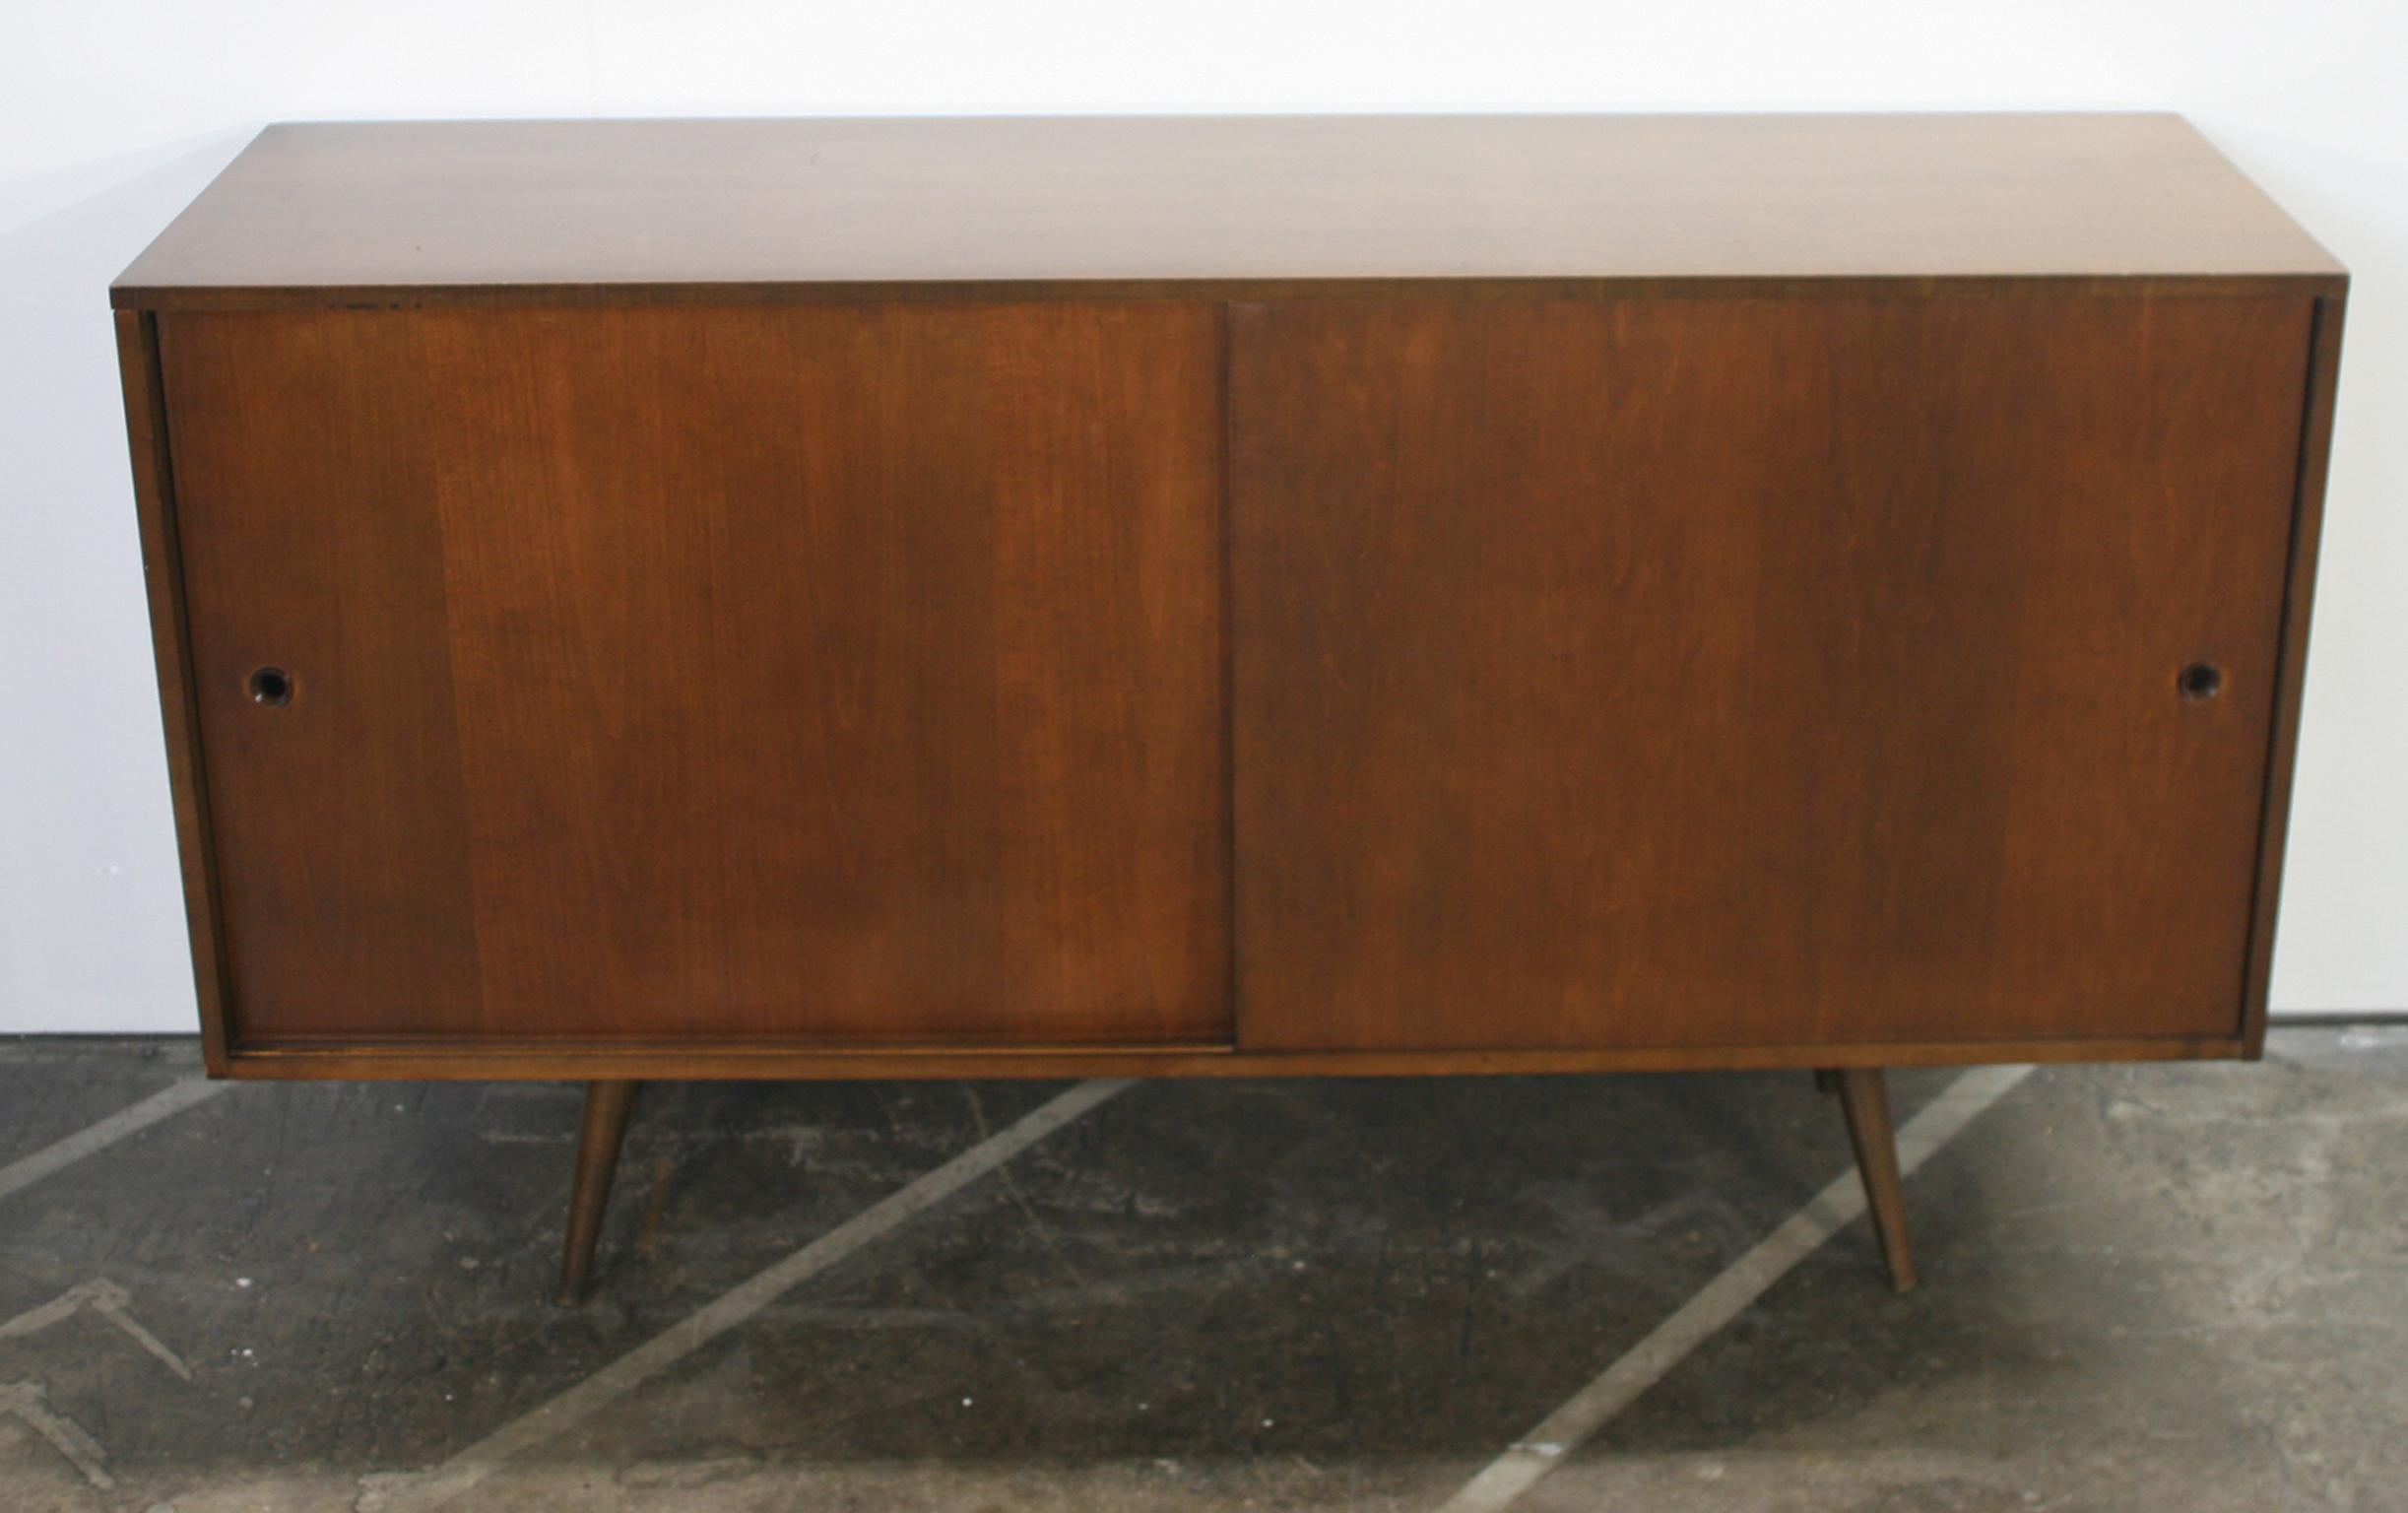 Beautiful midcentury tall credenza by Paul McCobb circa 1950 Planner Group #1514 has 1 adjustable shelves w/pins with 1 drawer on the left side and 3 drawers on the right side. Solid maple construction has a dark walnut finish. All original walnut